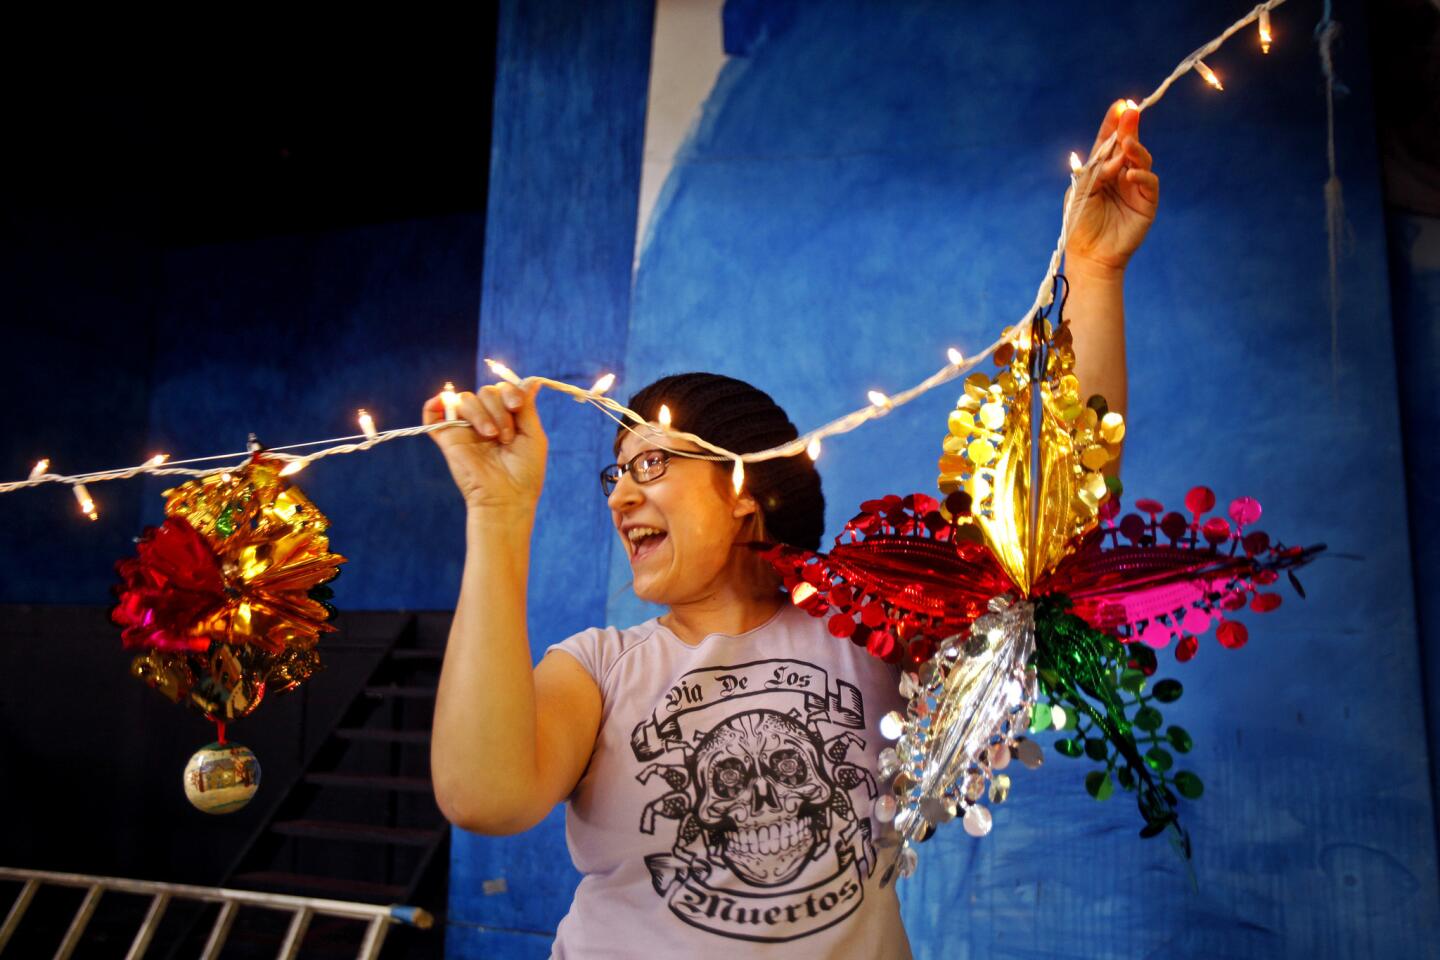 Lupe Legaspi, 33, of Montebello helps decorate the Casa del Mexicano, which recently opened its doors to the public for the first time since the new owner, the East Los Angeles Community Corp., took over the historic building where the Mexican elite once came to dance and be seen.